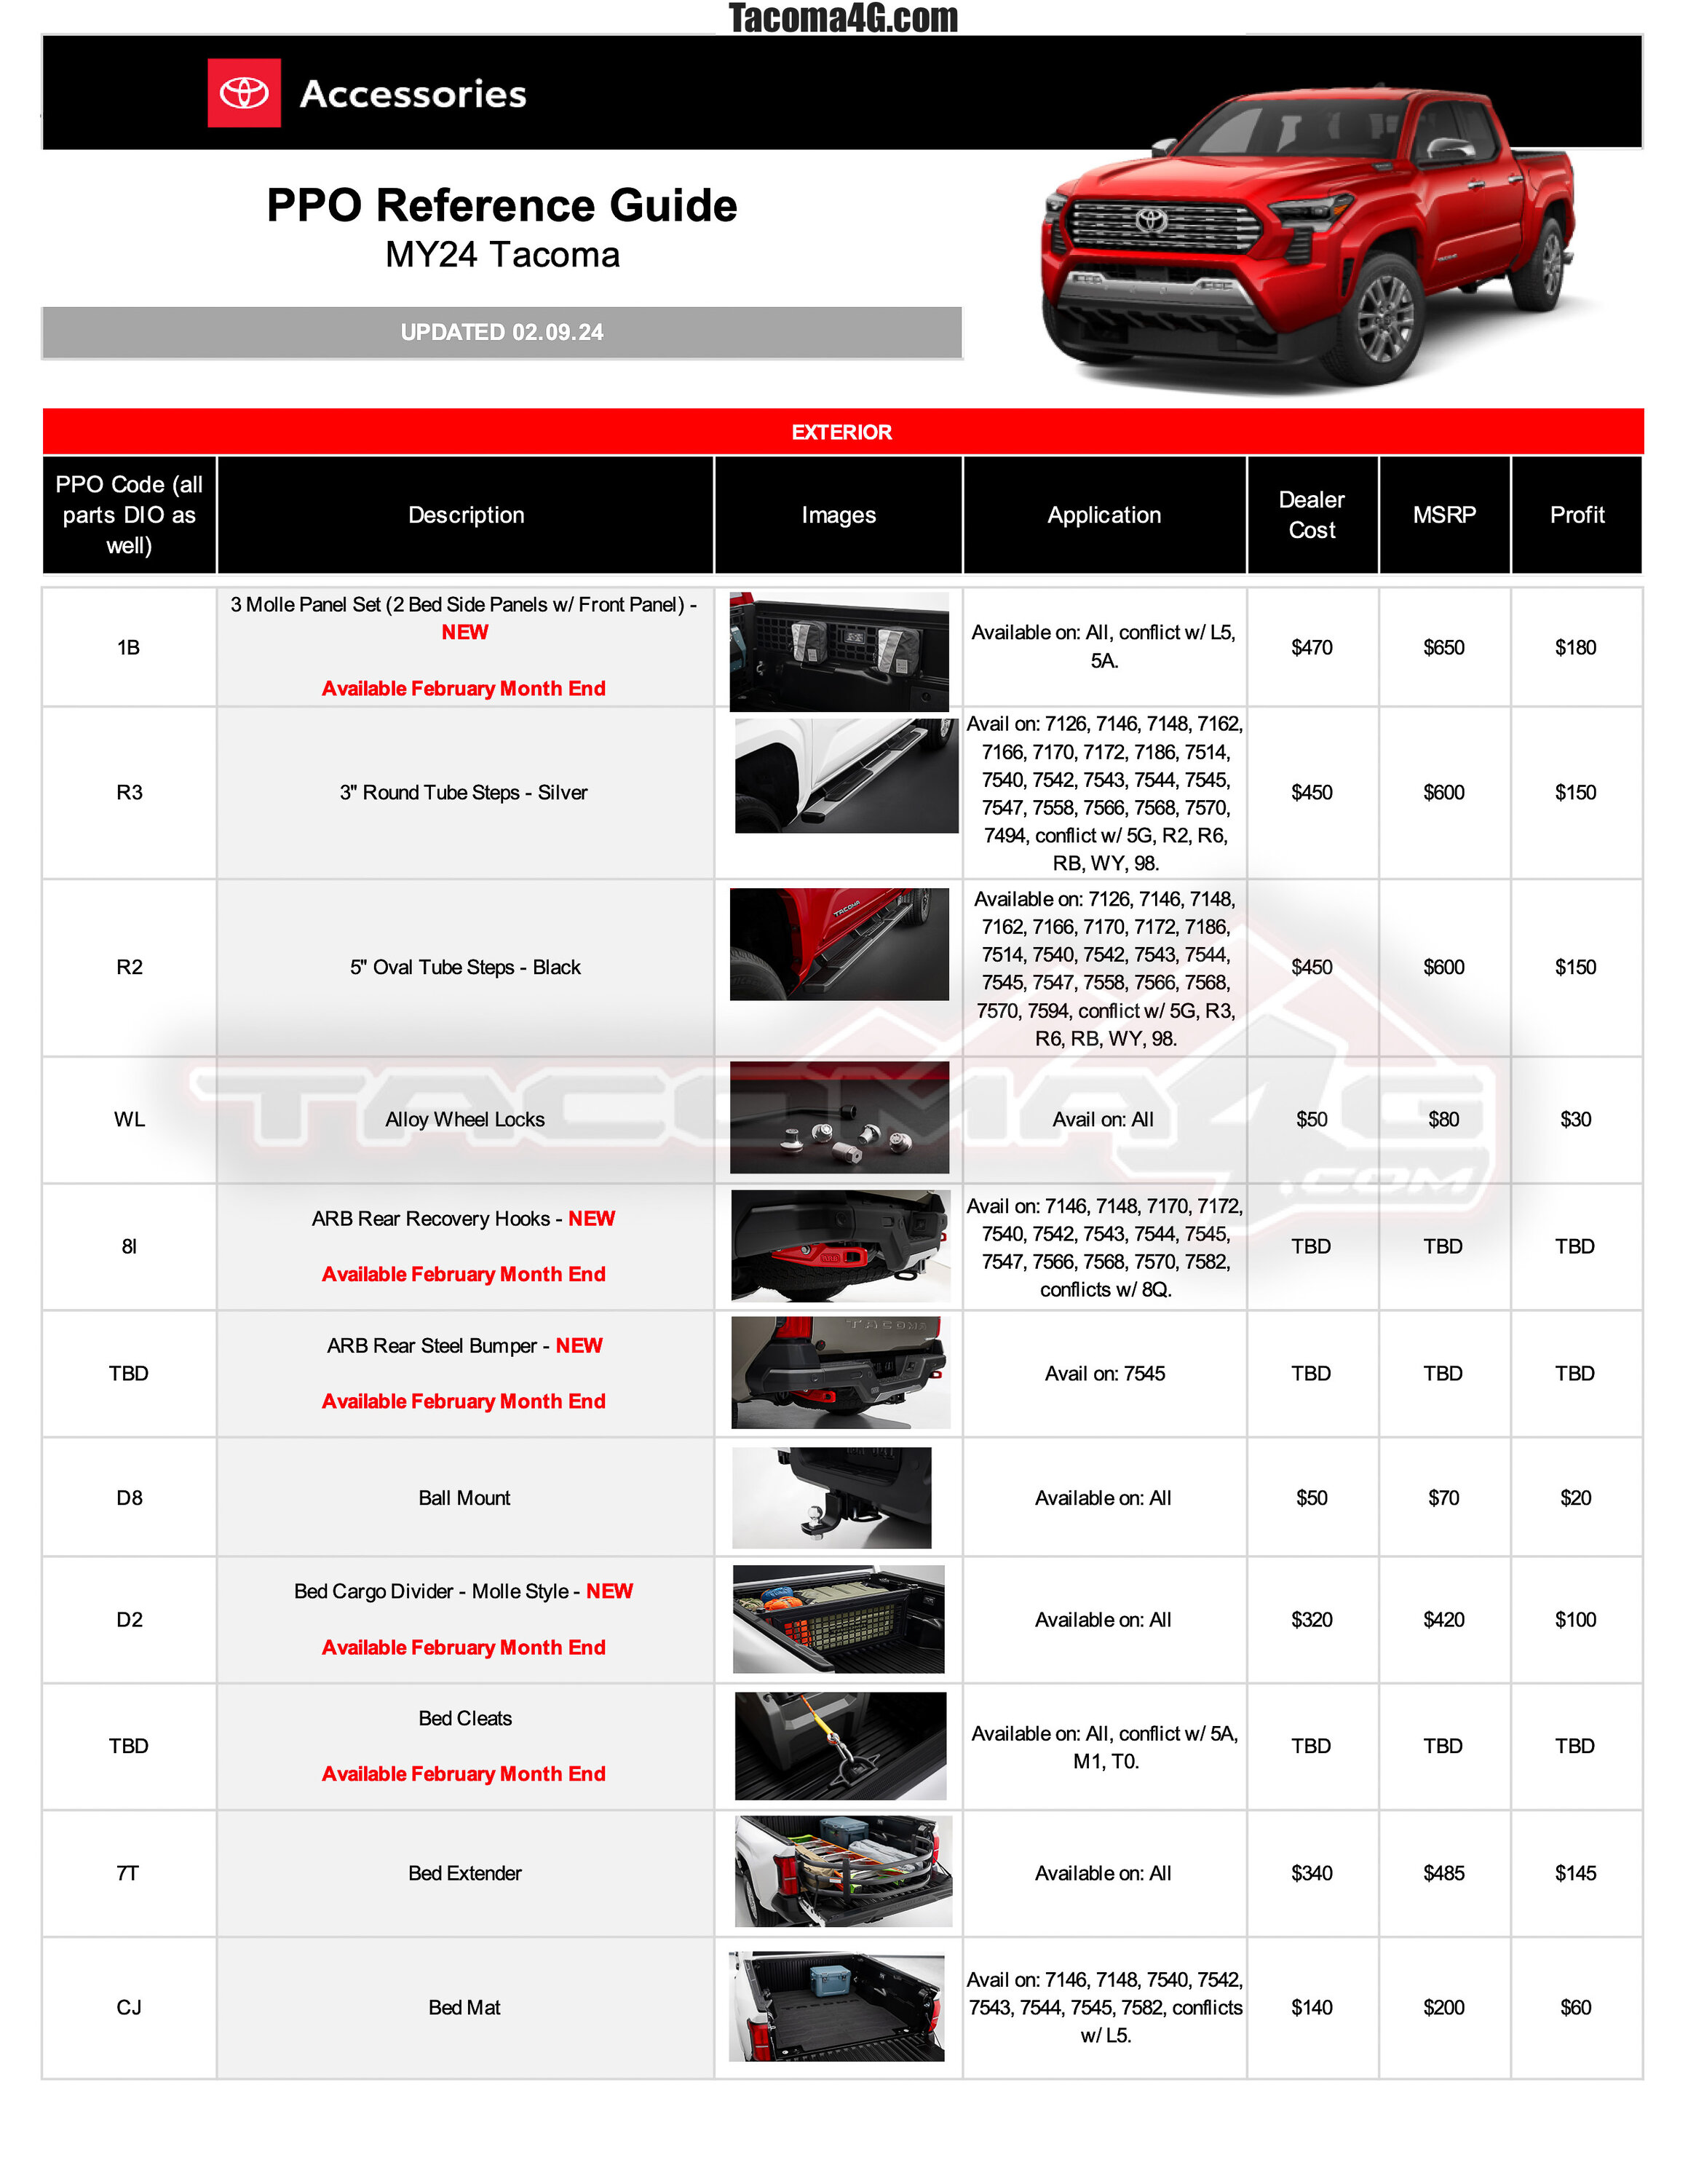 2024 Tacoma 2024 Tacoma Post-Production Options (PPO) Guide - OEM / TRD Accessories Parts + Pricing!  [UPDATED 5-7-24] 2024 Tacoma PPO Accessories Guide_02.09.24-1